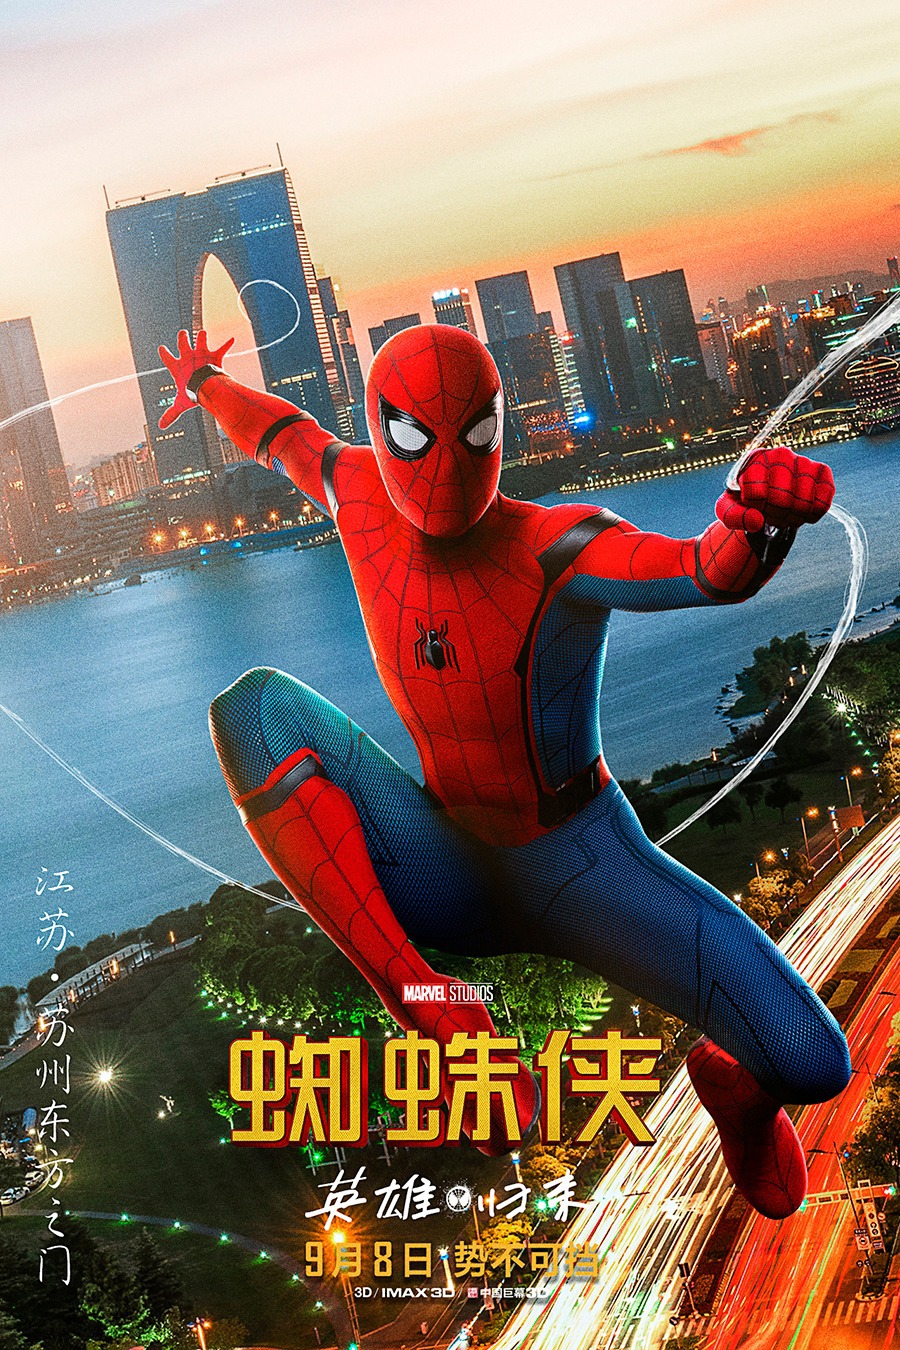 Extra Large Movie Poster Image for Spider-Man: Homecoming (#49 of 56)